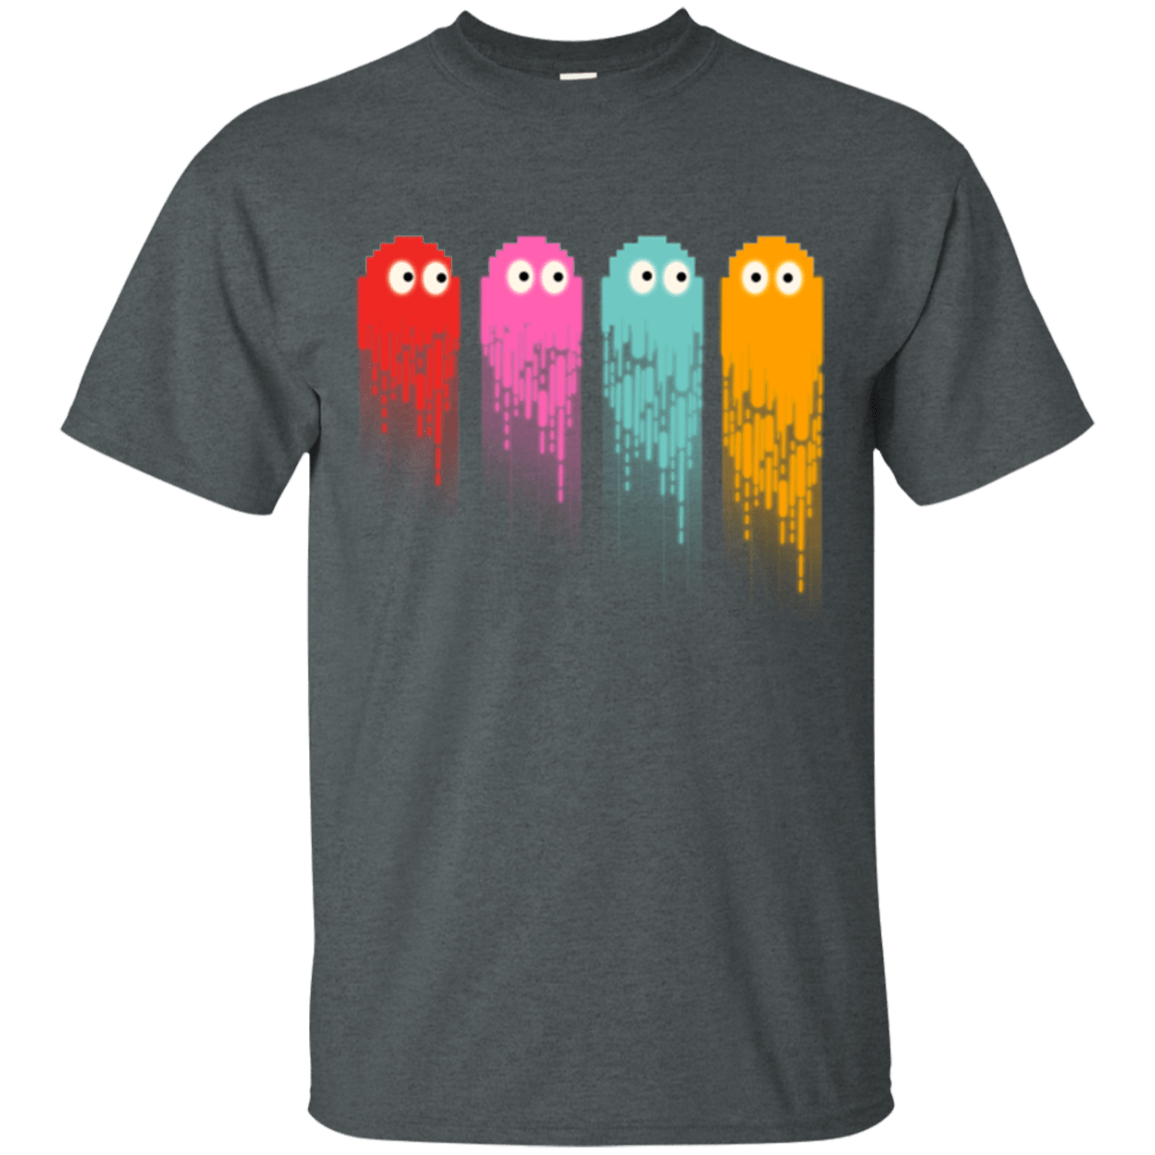 T-Shirts Dark Heather / Small Pac color ghost T-Shirt